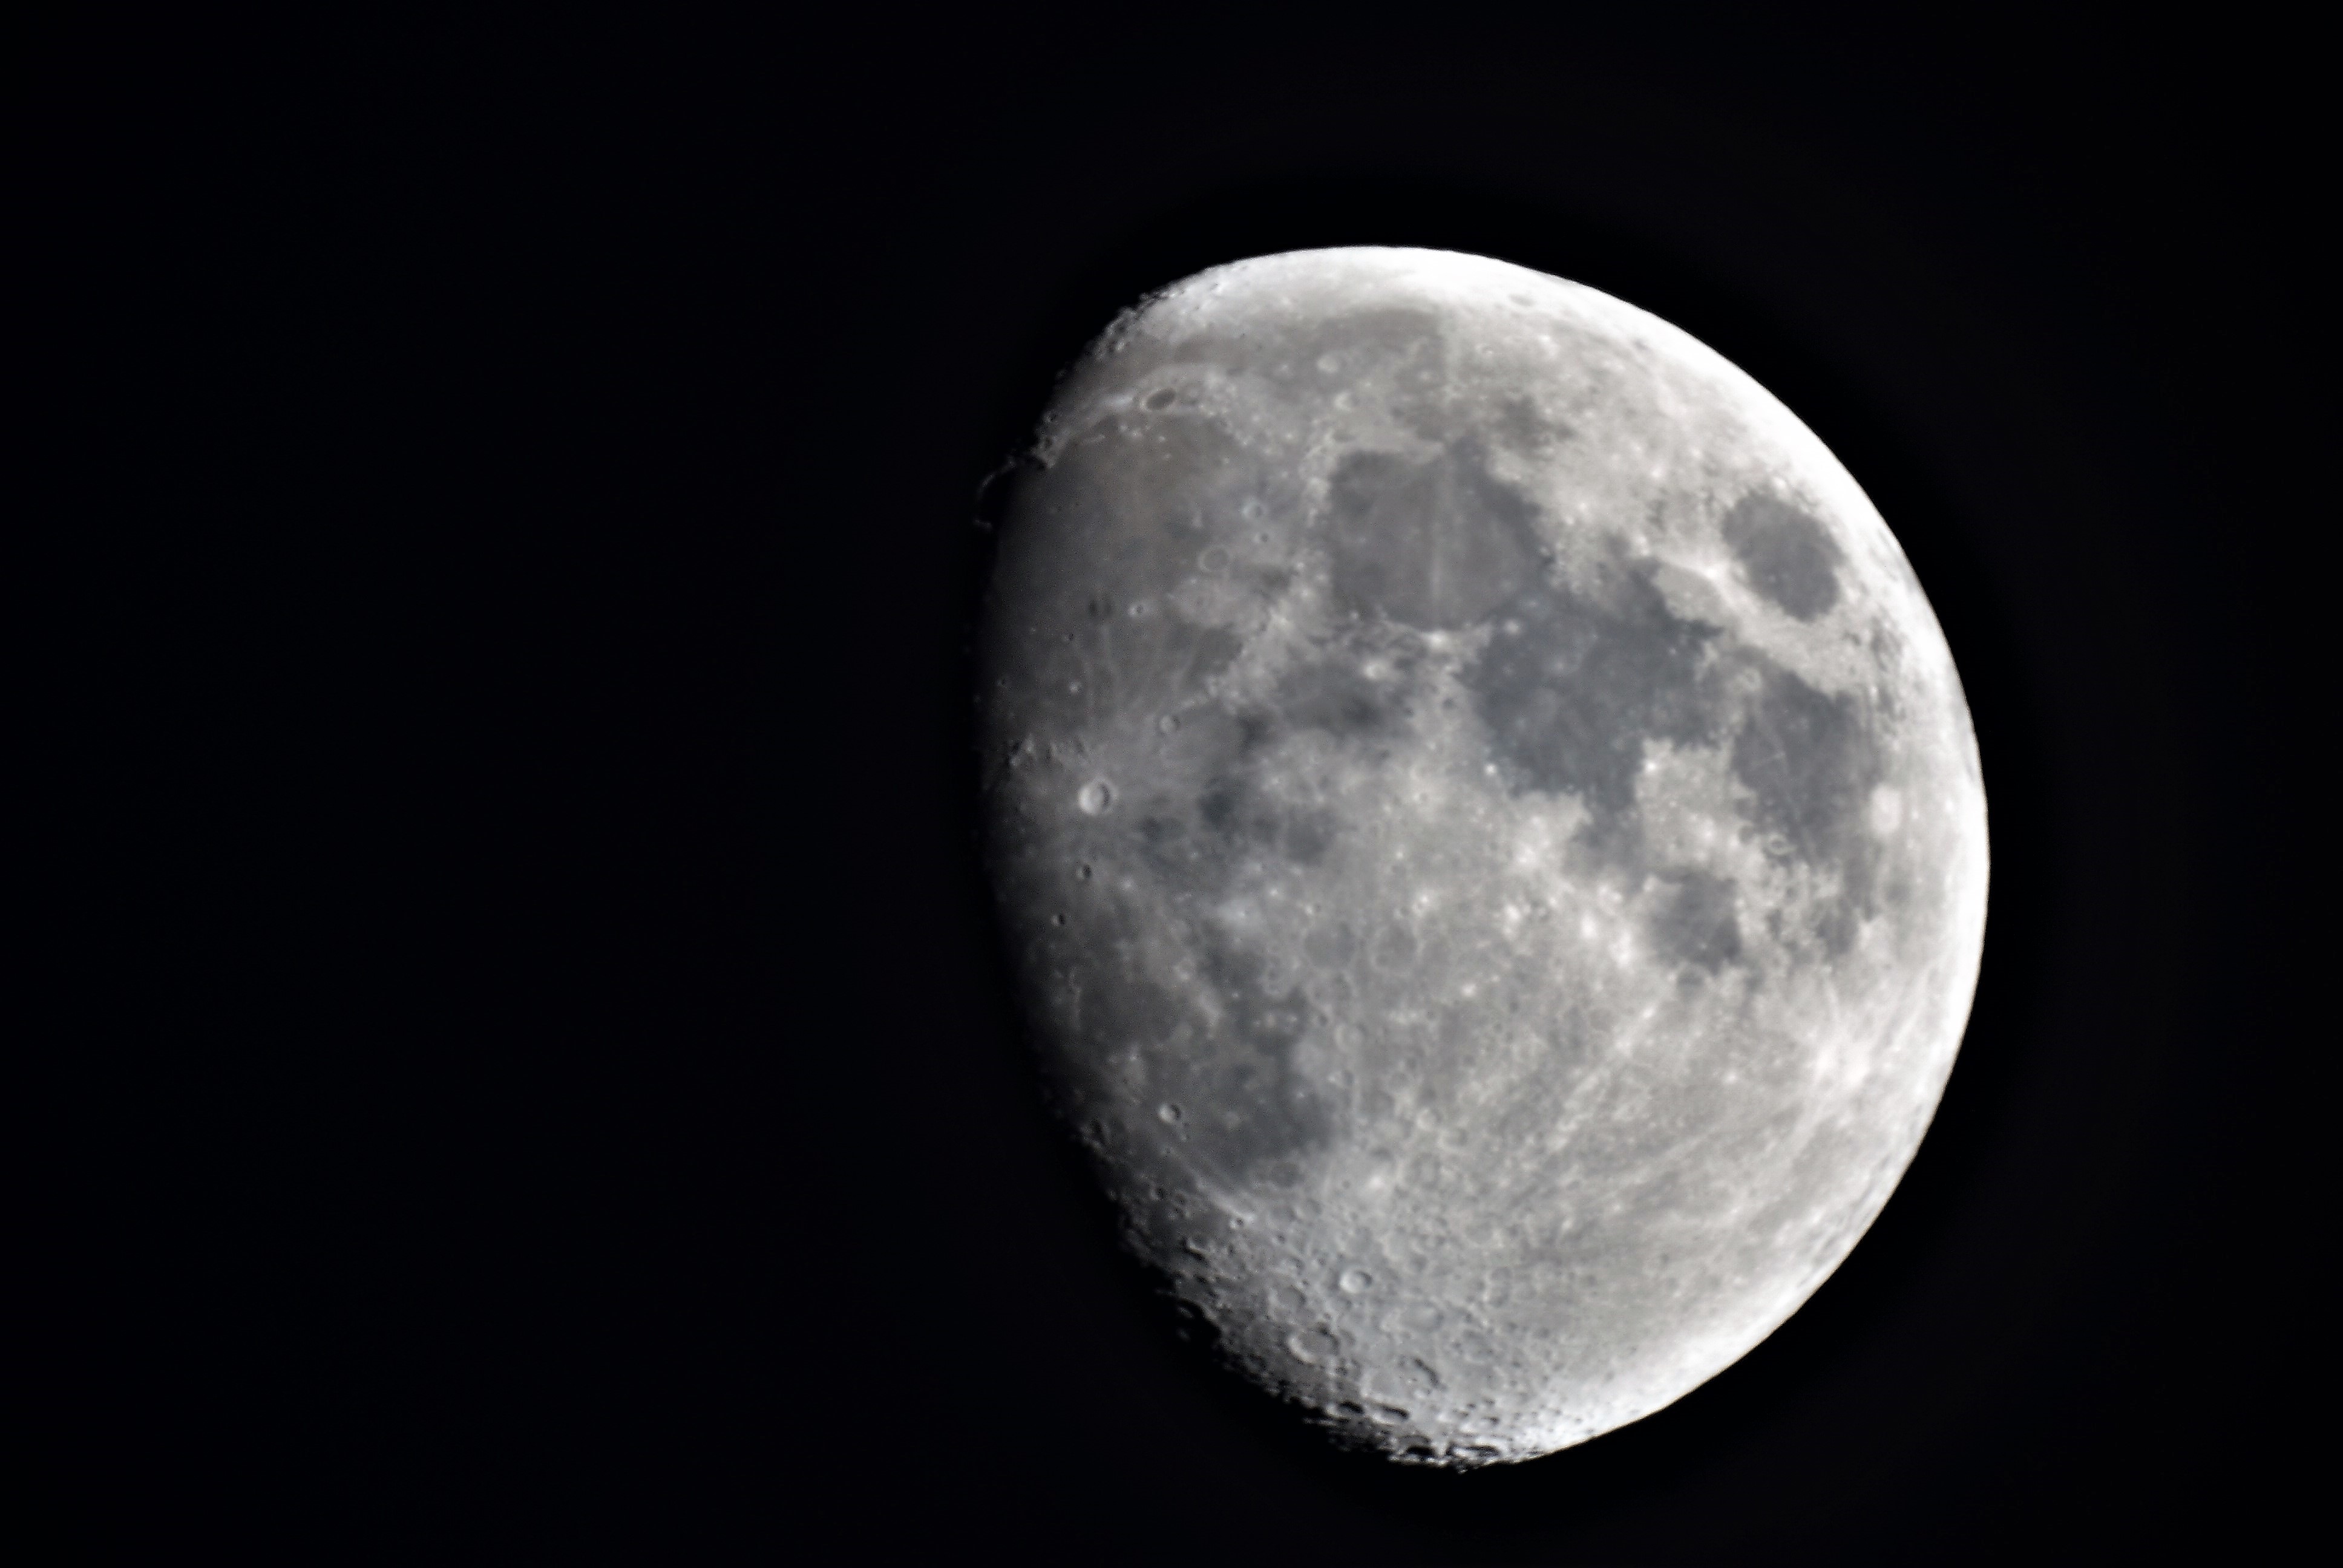 and yet another from Bill sent on 26th April.  He says (and I think he is only joking) "I'm really getting bored with all these clear nights when I have nothing better to do than take another Moon pic!  Here's last night's."